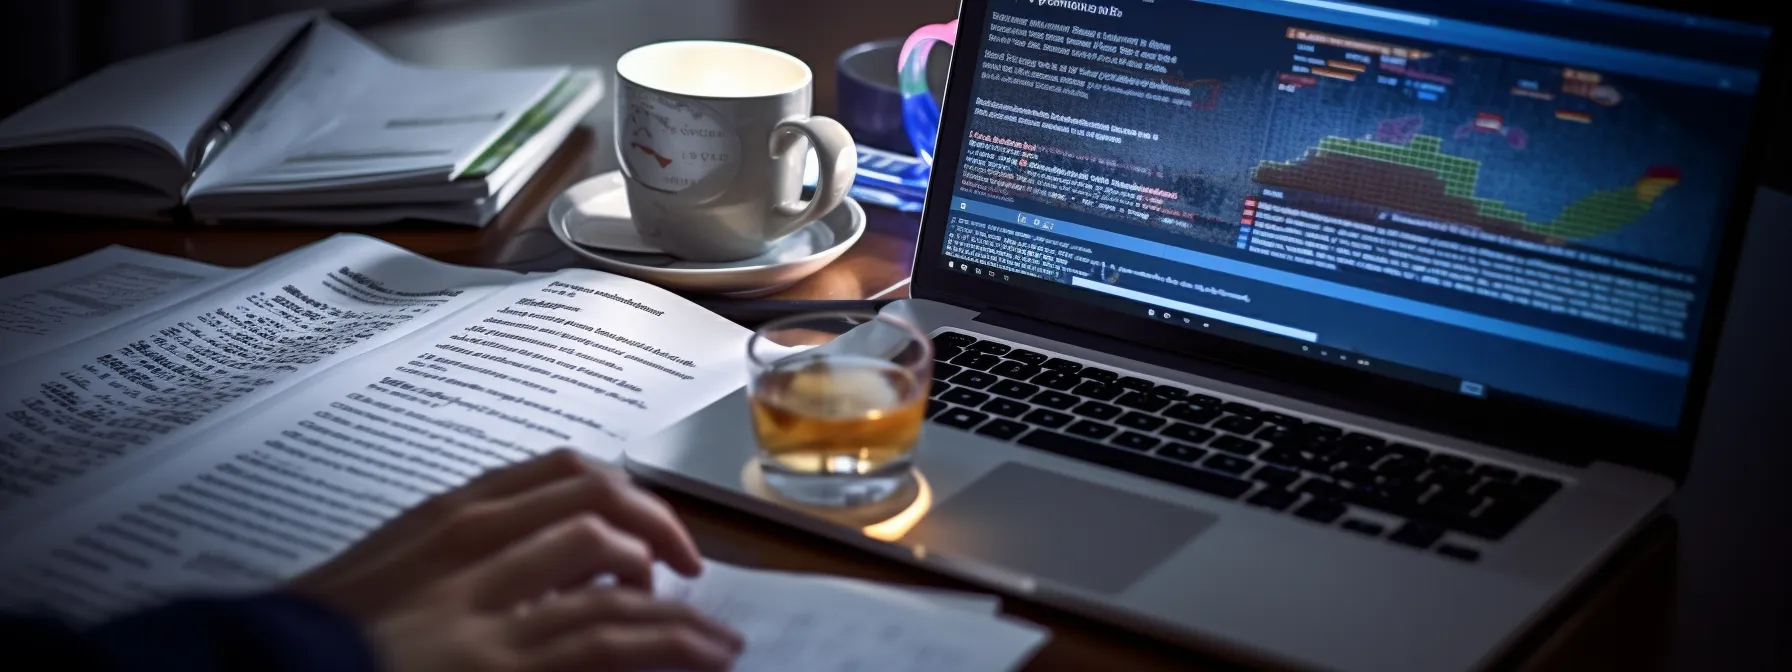 a person studying seotheory's course material on a laptop with notes and a coffee cup, surrounded by seo tools and digital marketing resources.